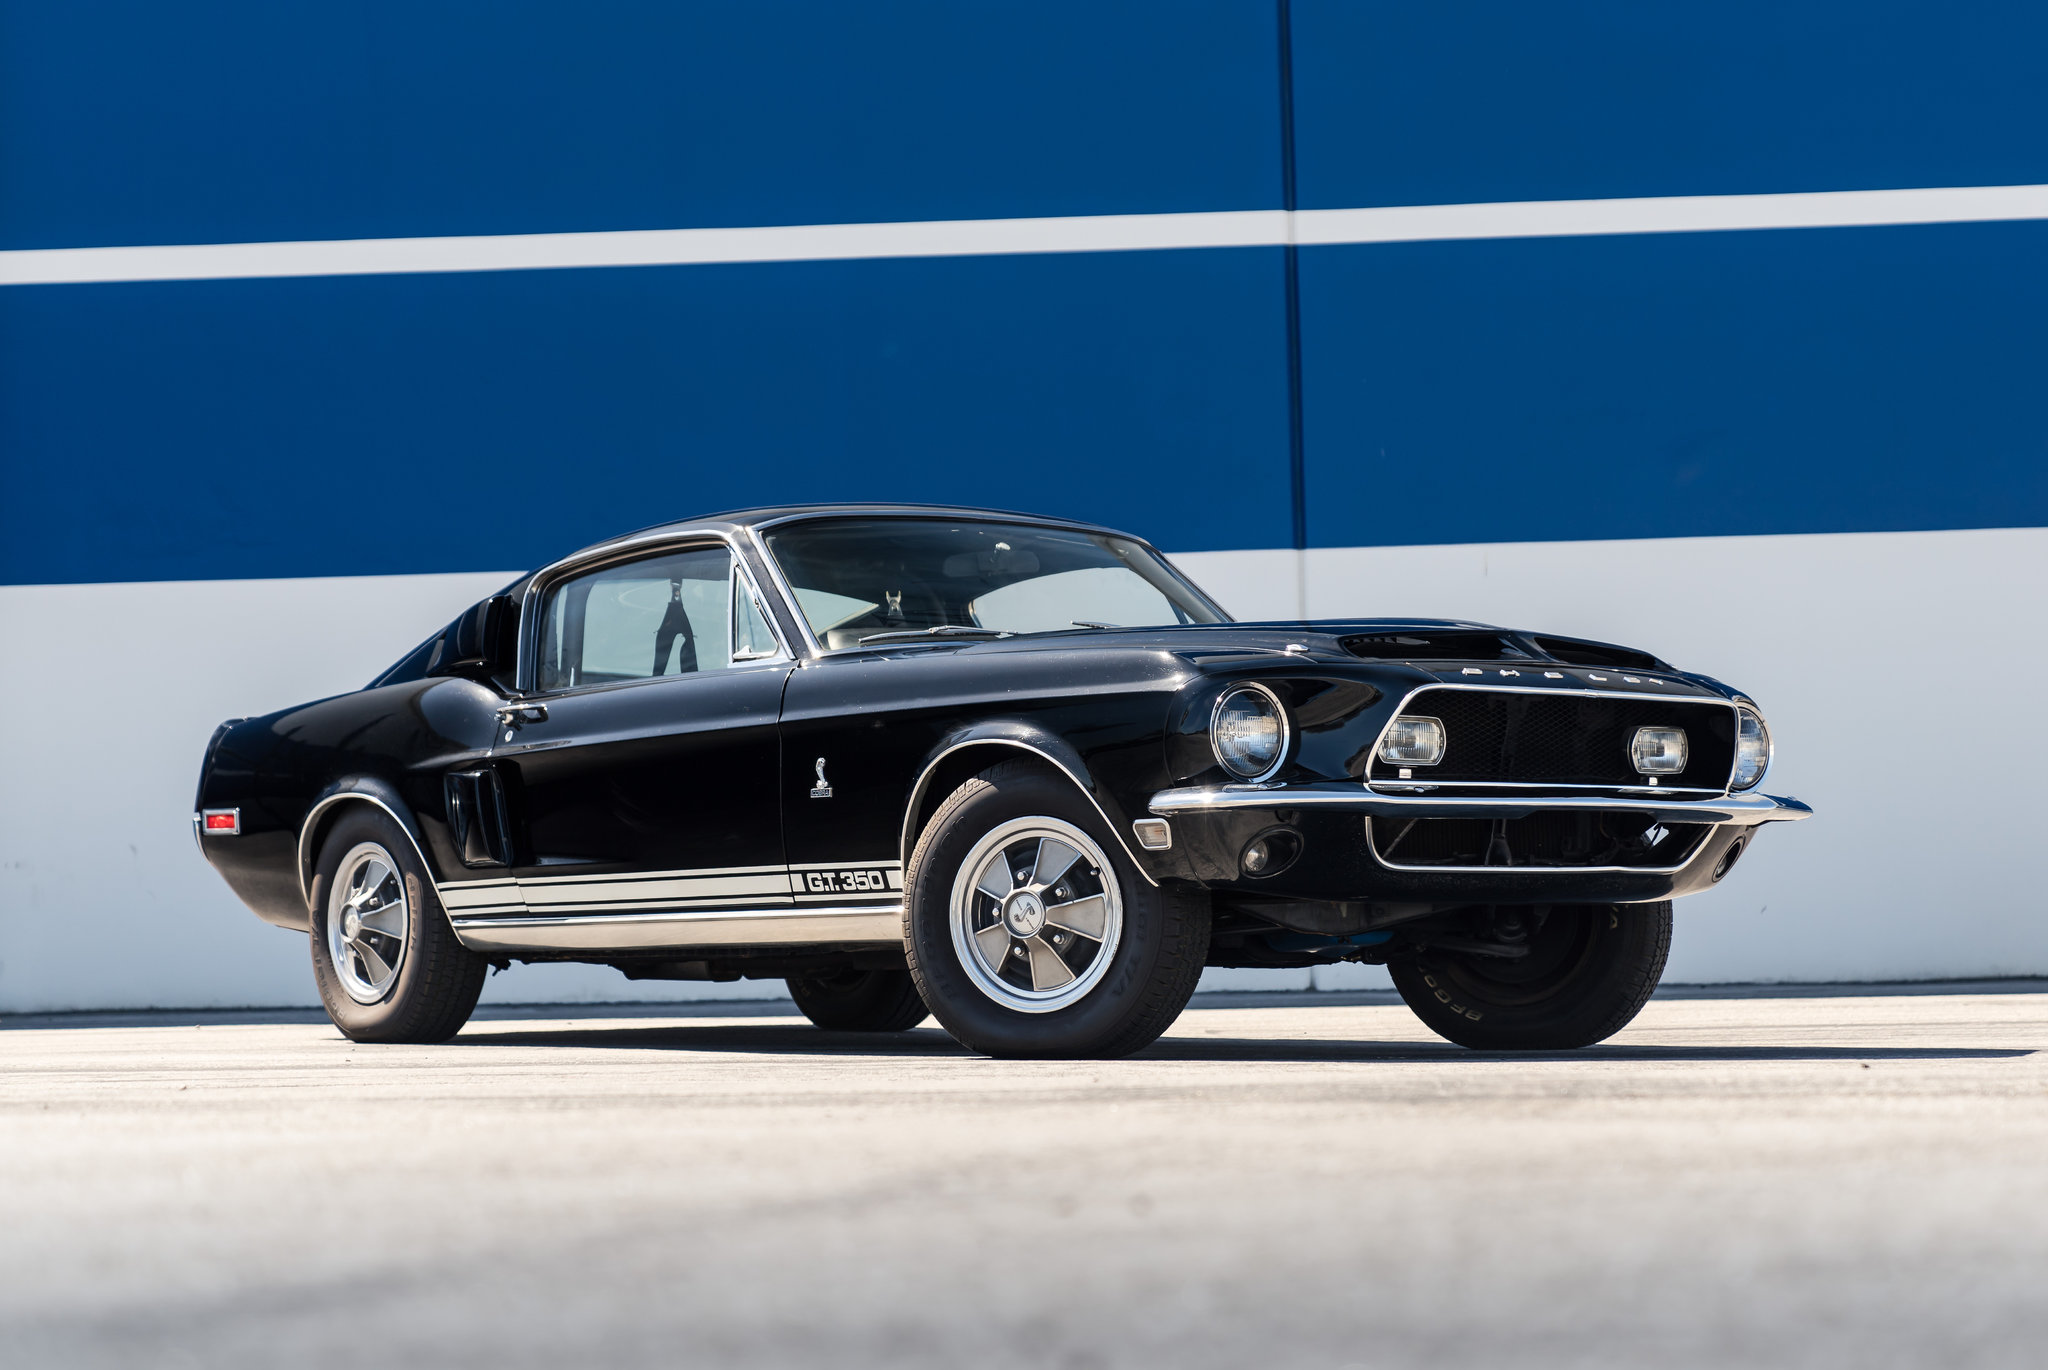 13-facts-about-national-ford-mustang-day-april-17th